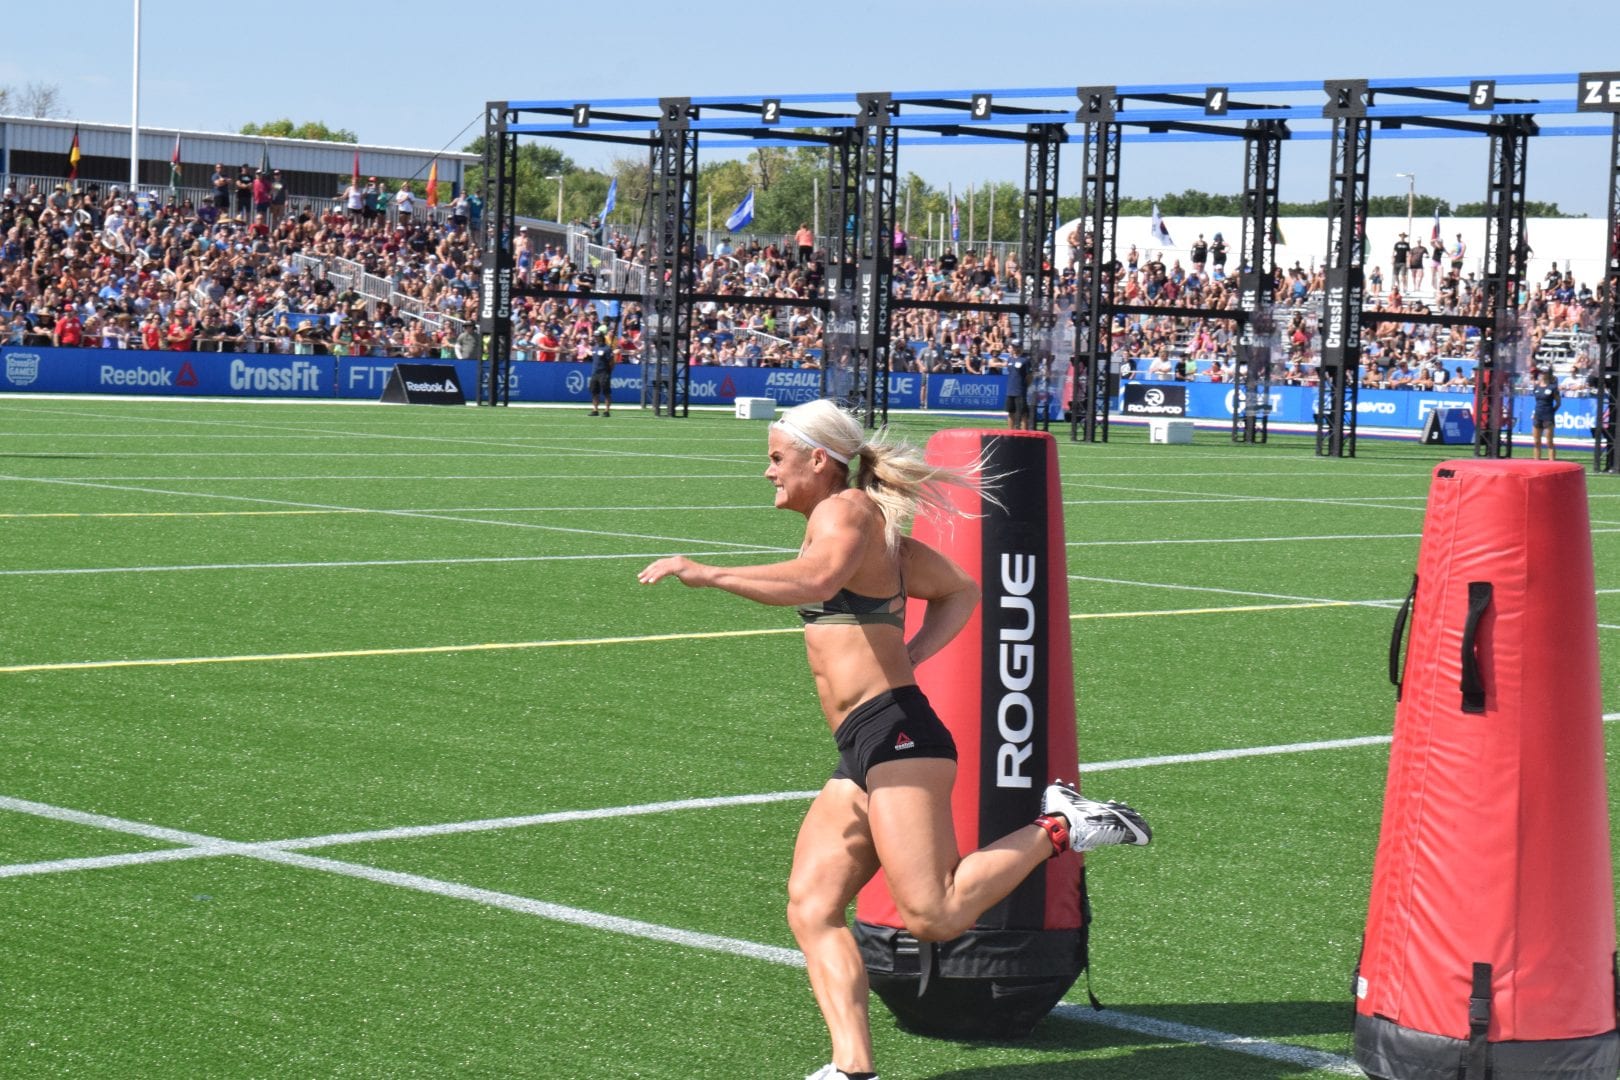 Sara Sigmundsdottir competes in the Sprint event at the 2019 CrossFit Games.